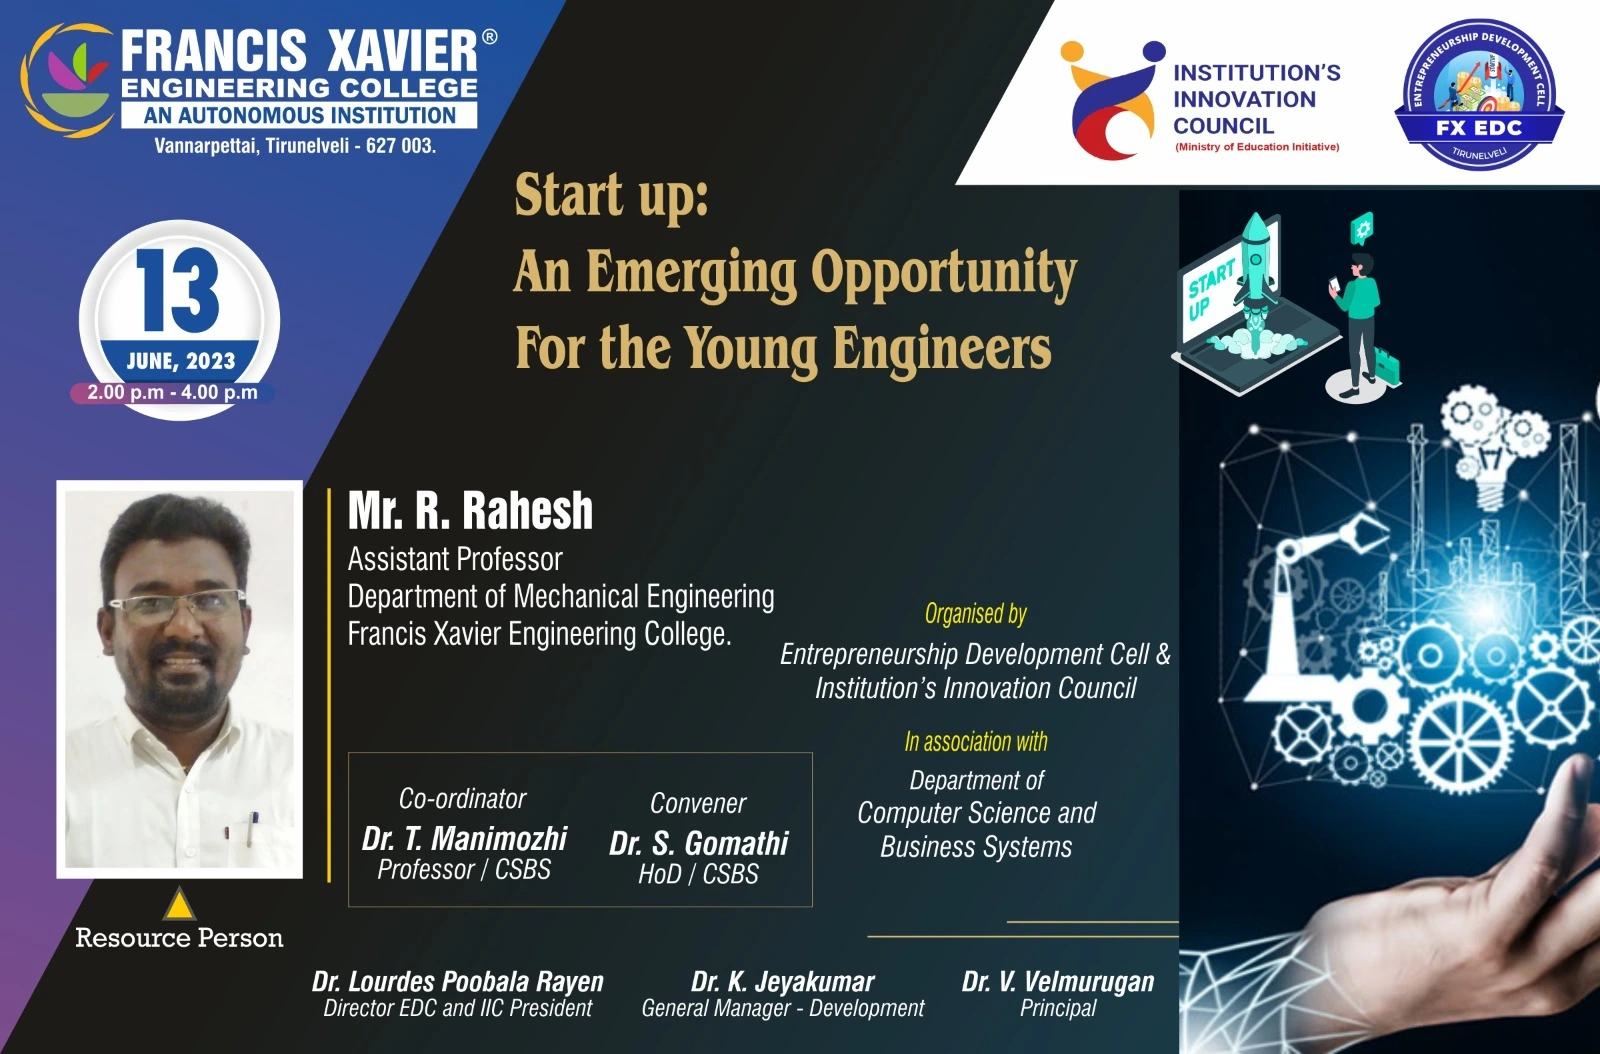 An Emerging Opportunity for the Young Engineers